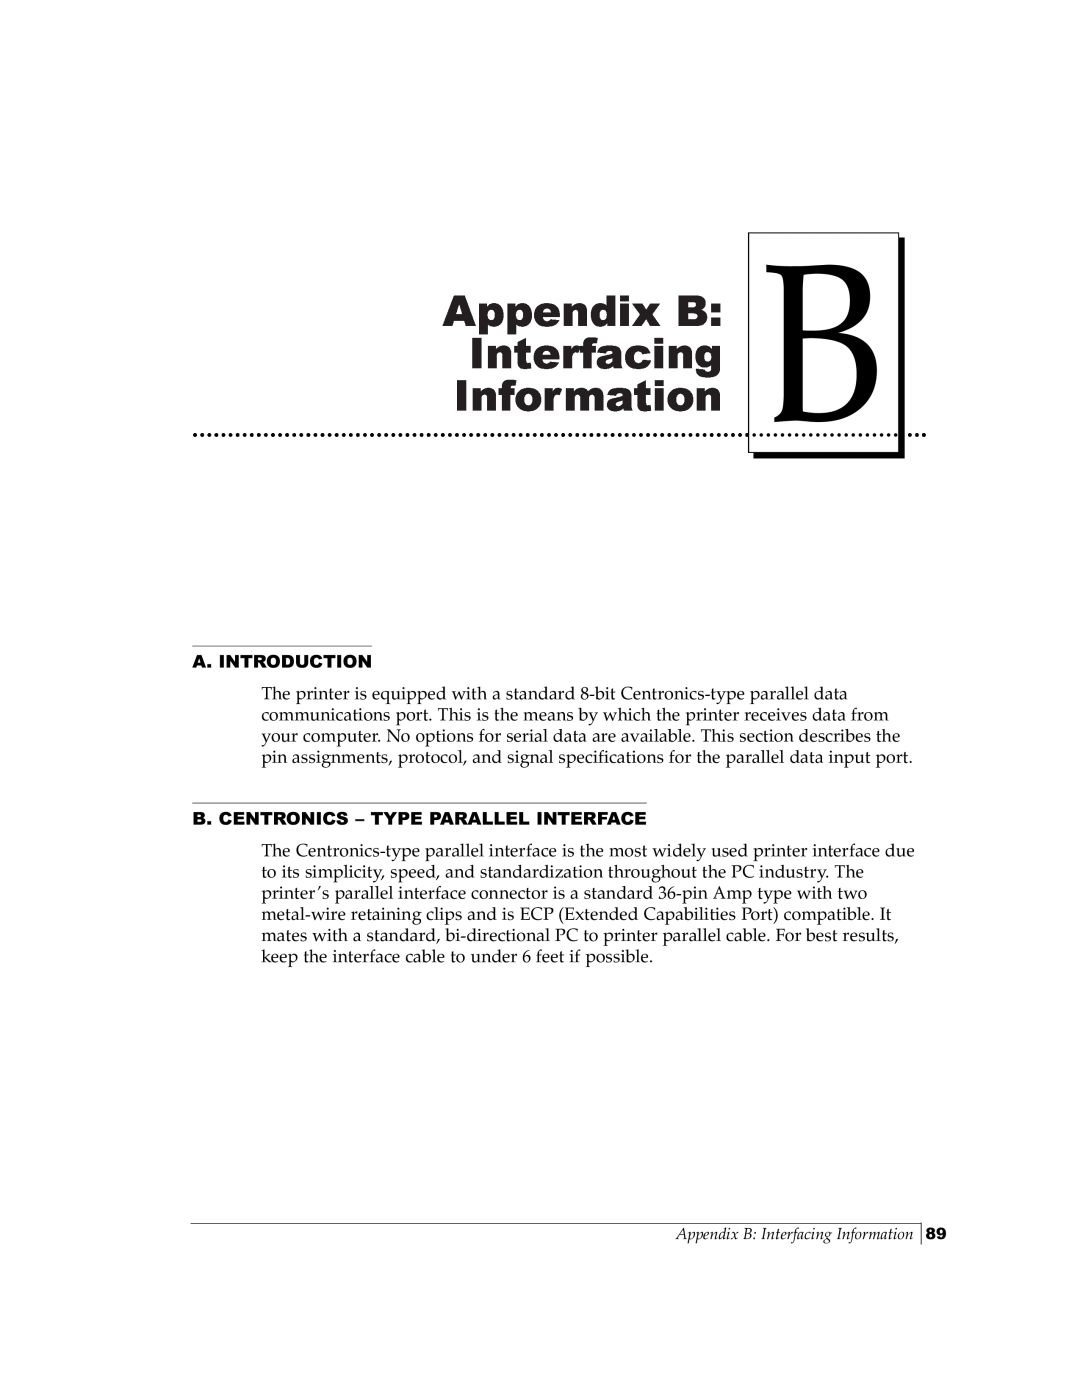 FARGO electronic Pro-L manual Appendix B Interfacing Information, A. Introduction, B. Centronics - Type Parallel Interface 